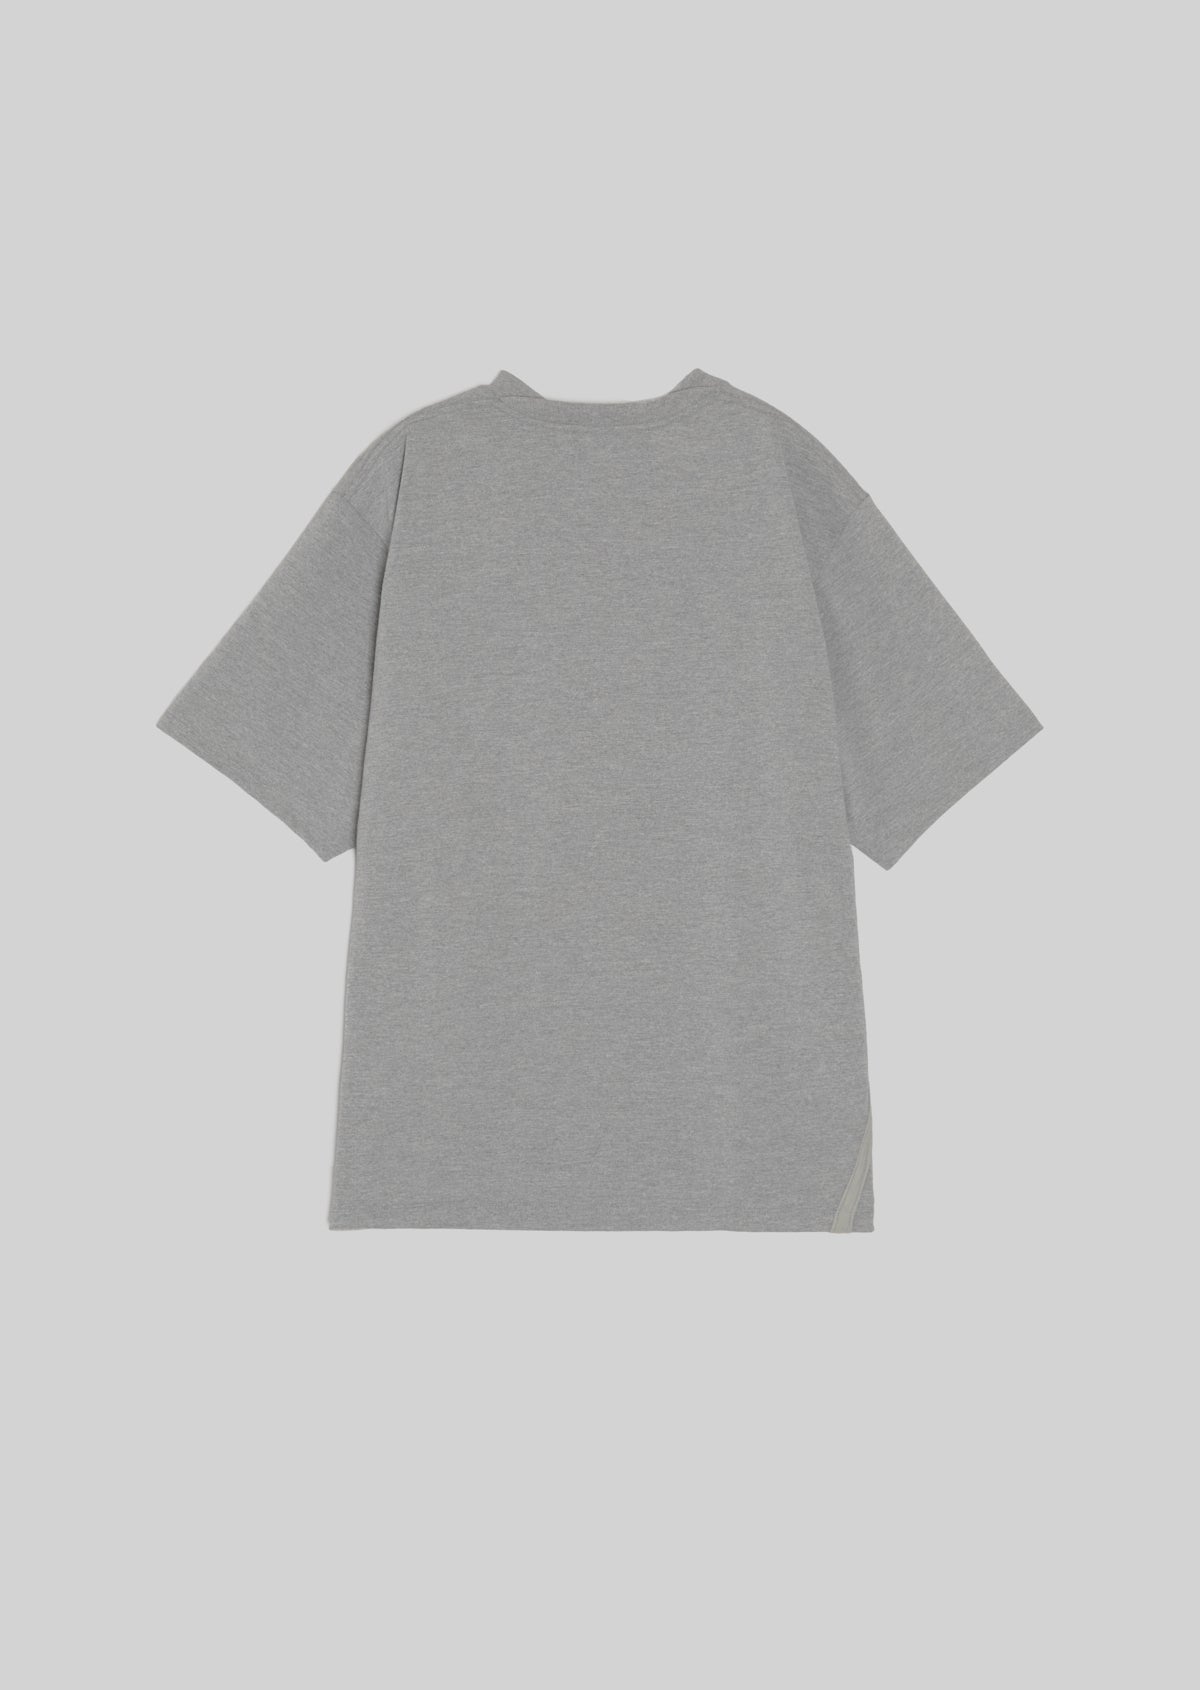 POLYESTER COTTON FEEL T-SHIRT GREY　8001-1702